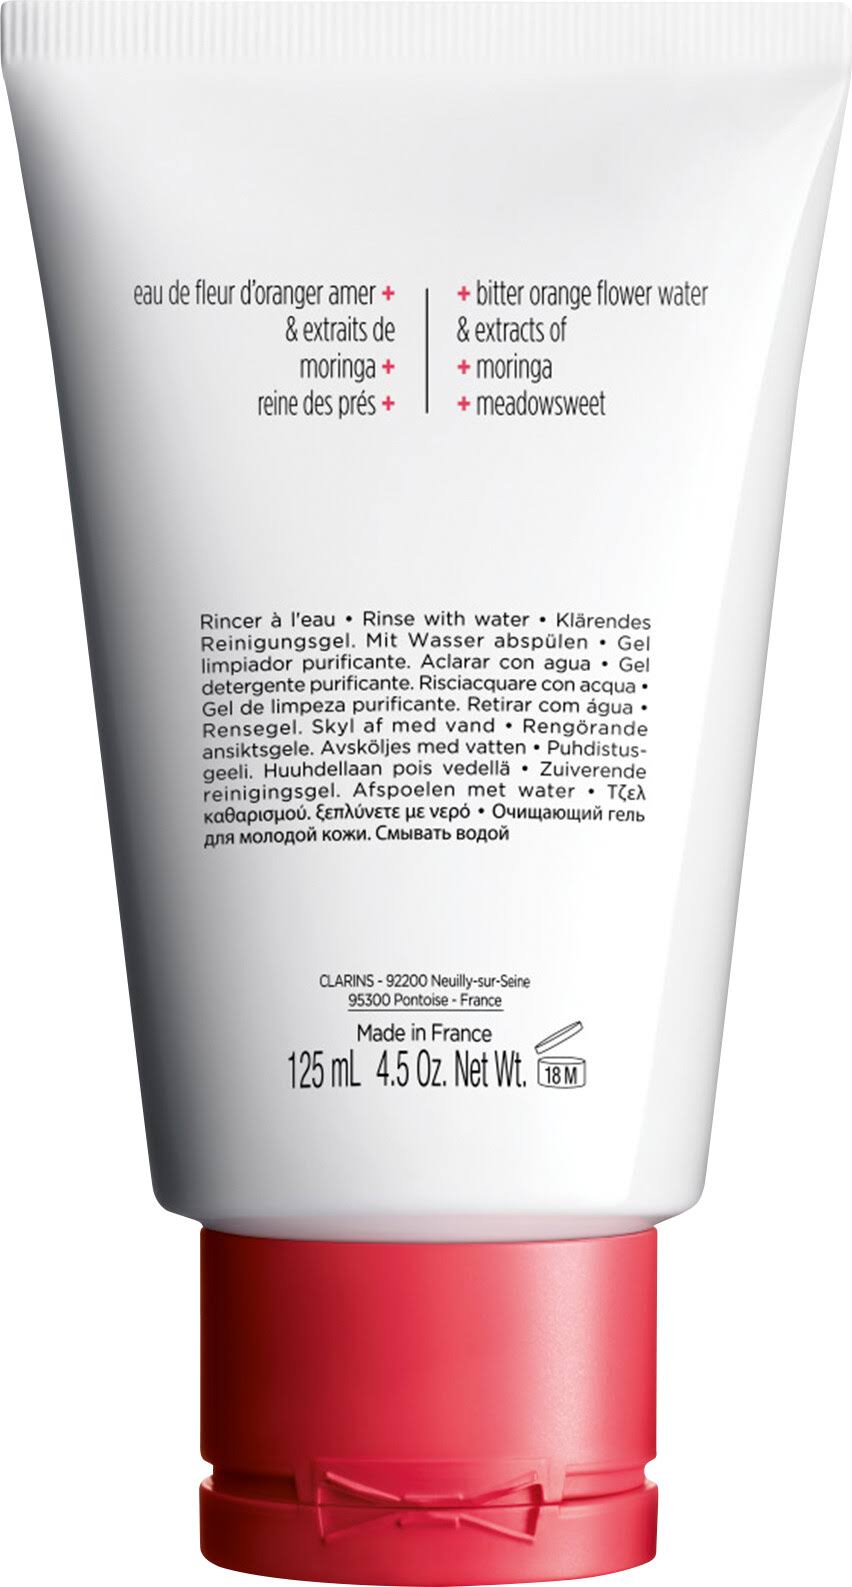 My Clarins Re-Move Purifying Cleansing GEL 125ml